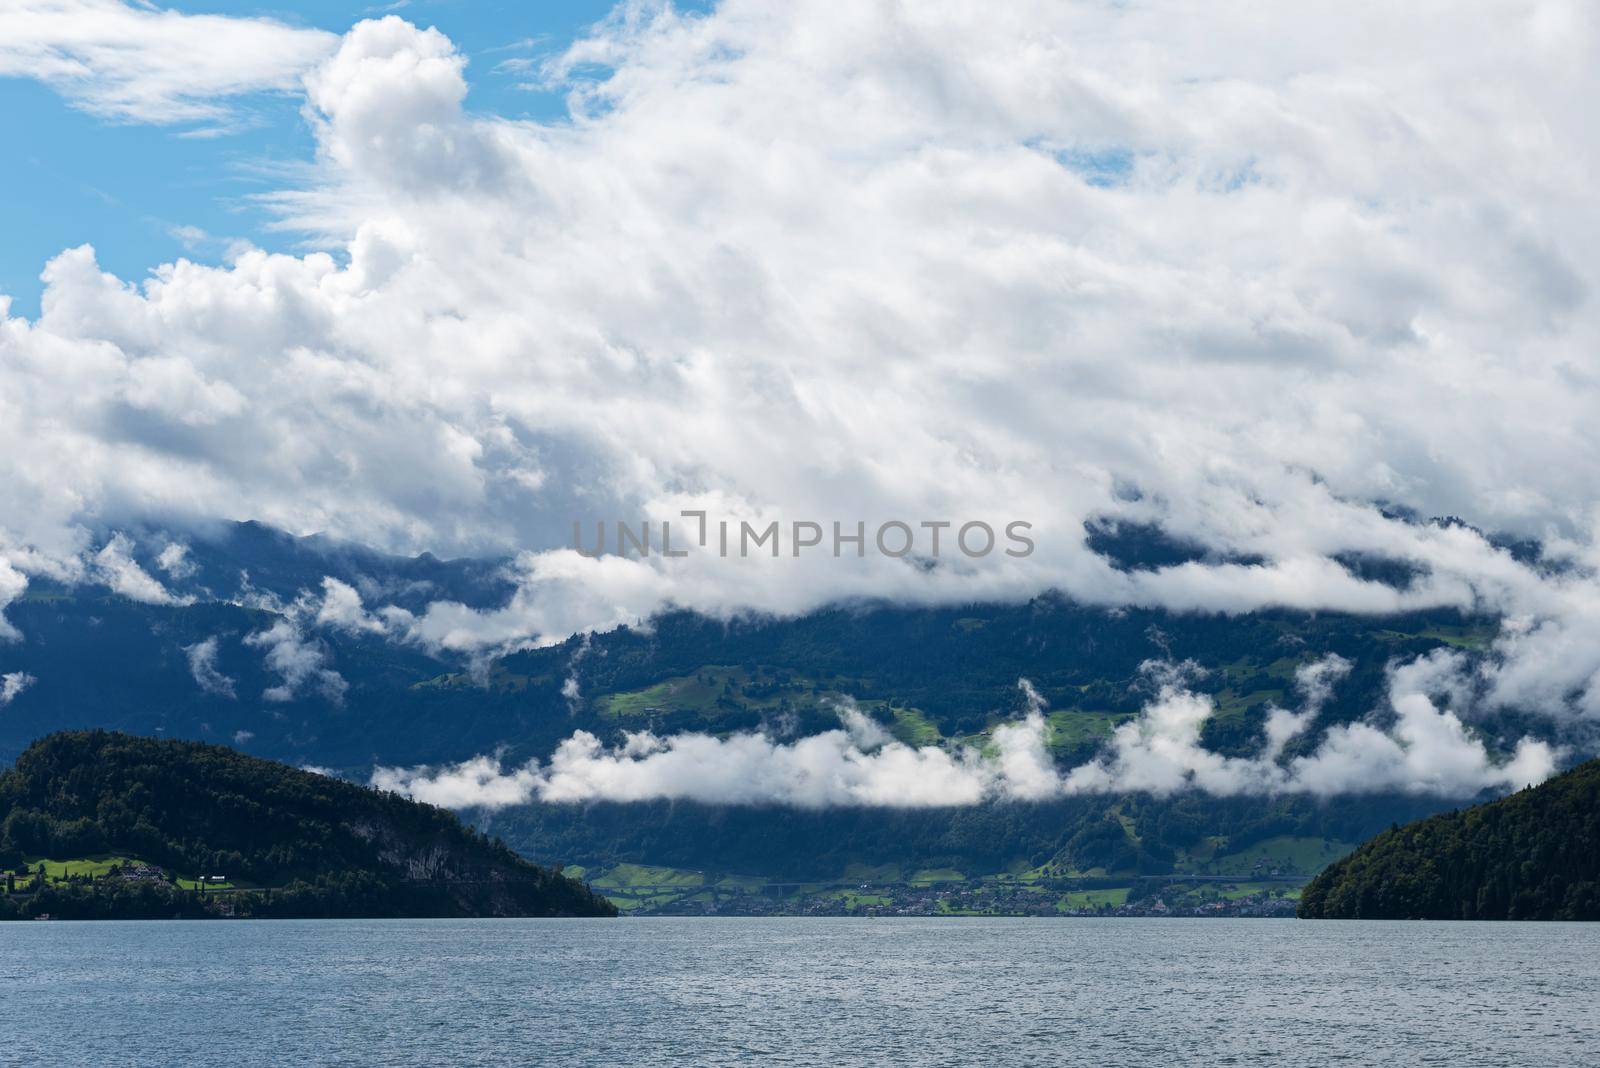 Landscape with Lake Lucerne and Alps, Switzerland.